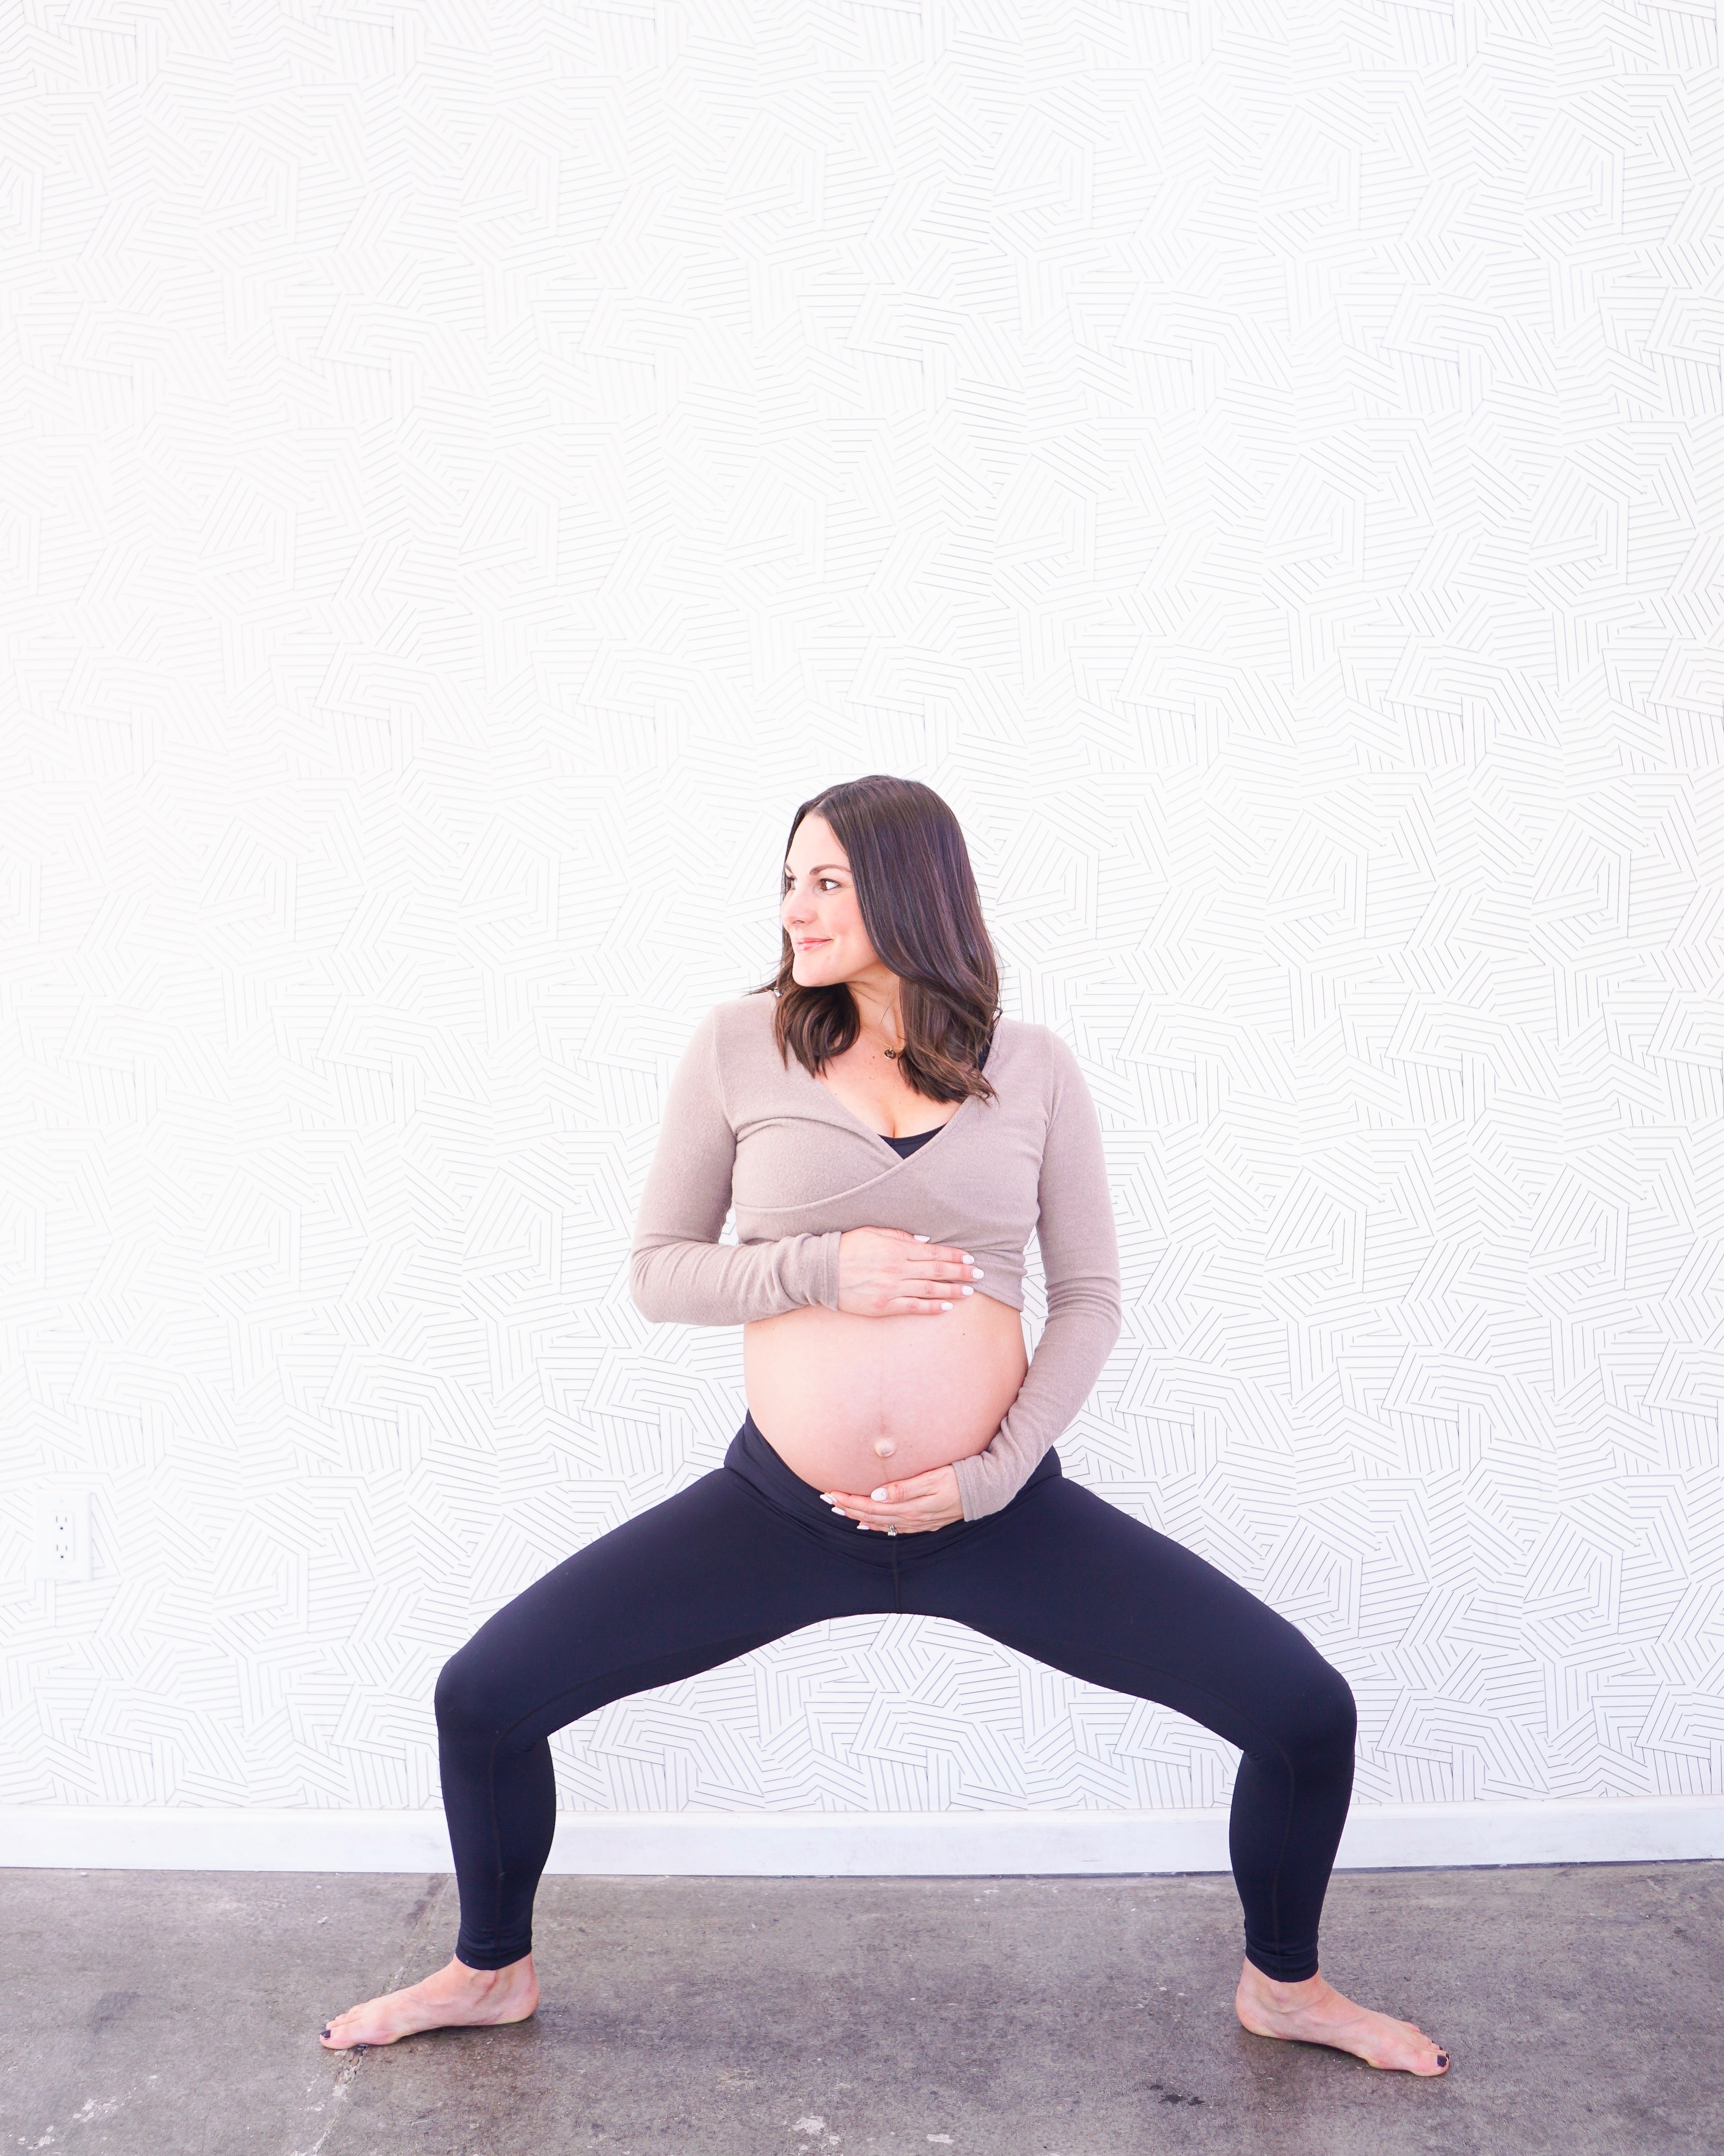 Yoga Poses to Avoid During Pregnancy with Modifications // Whitney